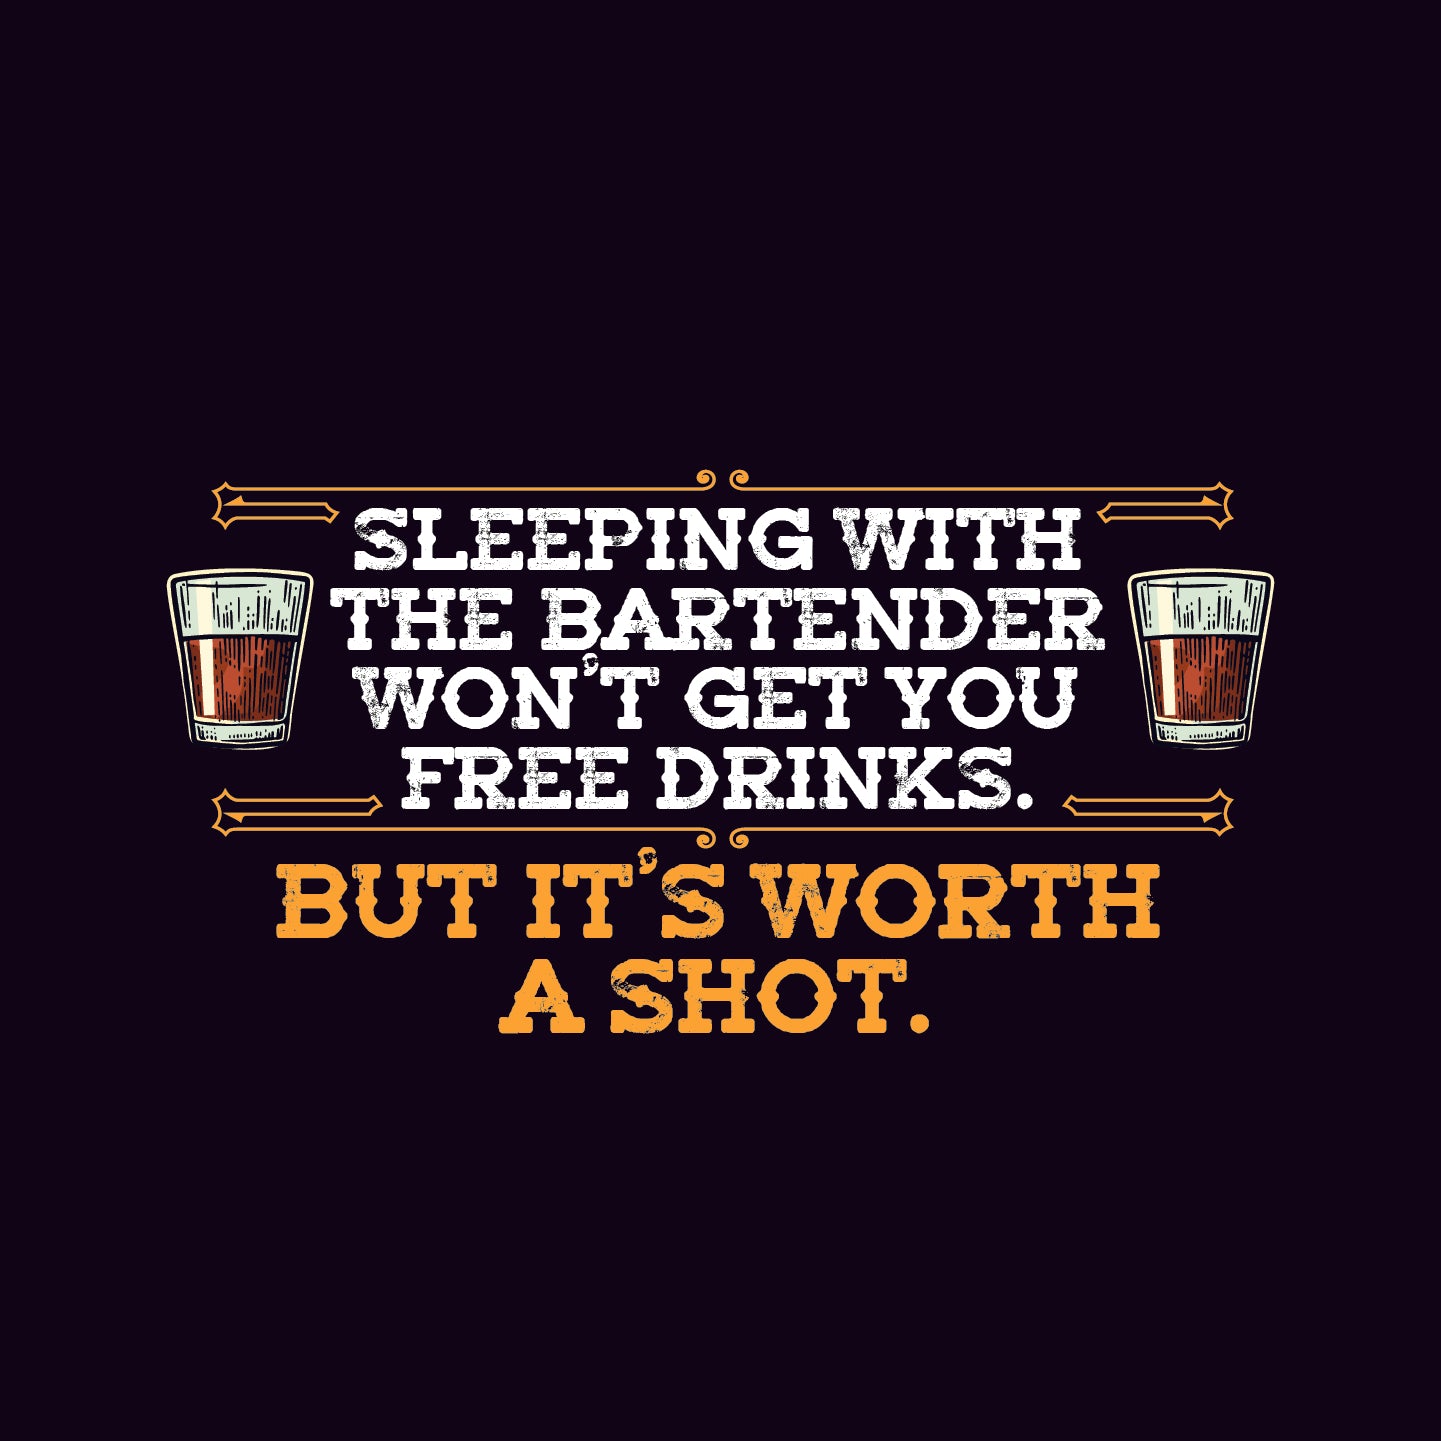 Sleeping with the bartender won't get you free drinks. But it's worth a shot.